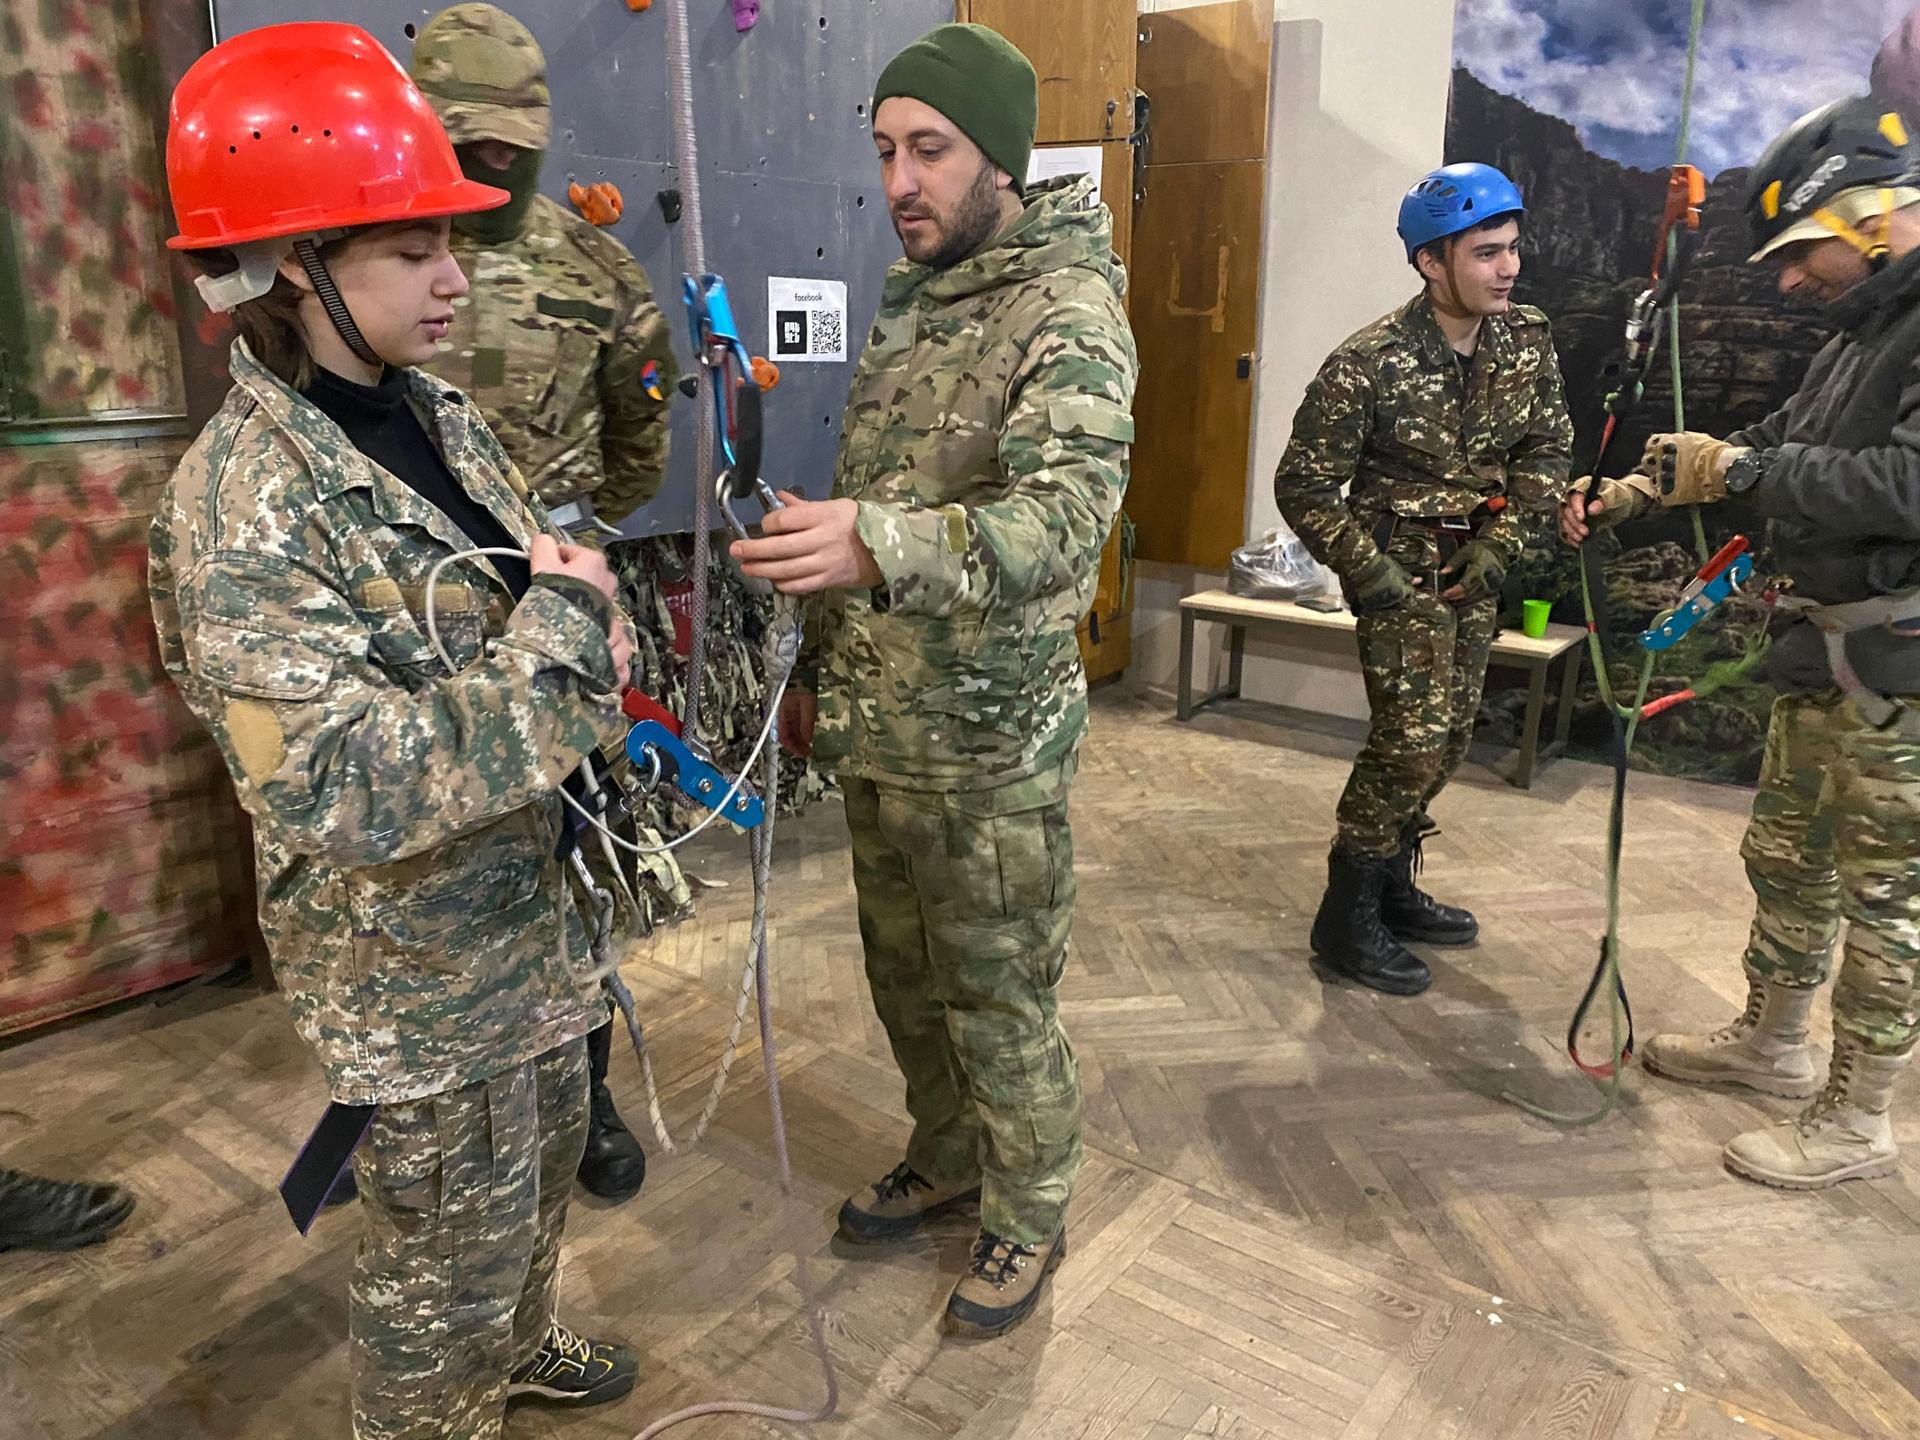 Students learn mountaineering skills at VOMA, an organization in Yerevan, Armenia, that teaches civilians survival and combat skills to prepare them to defend the country from a potential invasion from neighboring Azerbaijan.